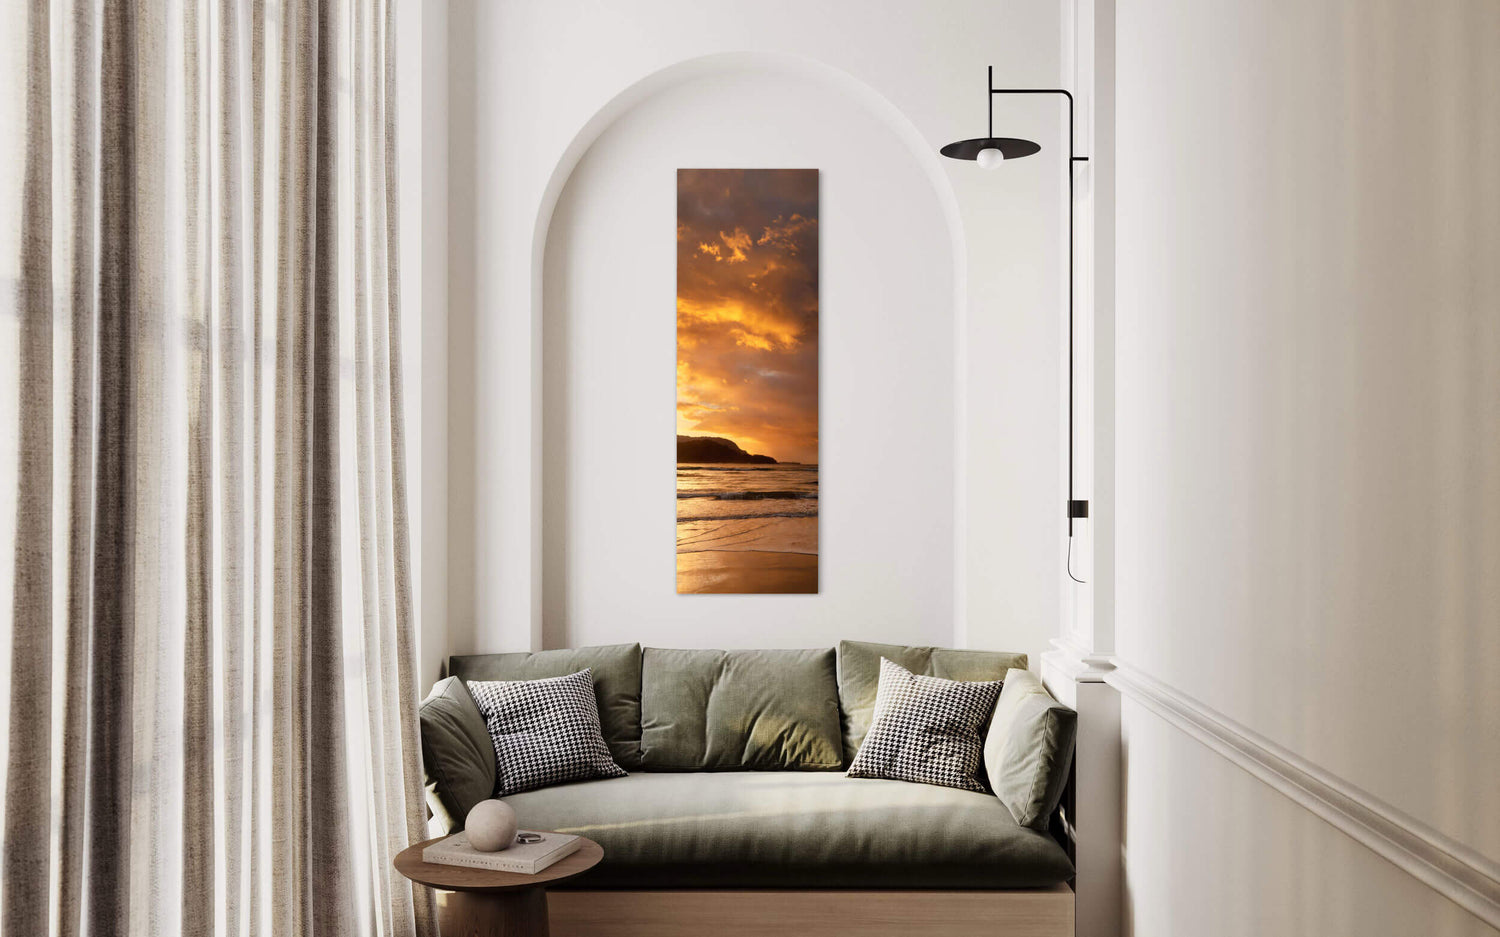 A Hanalei sunset picture from Kauai hangs in a living room.